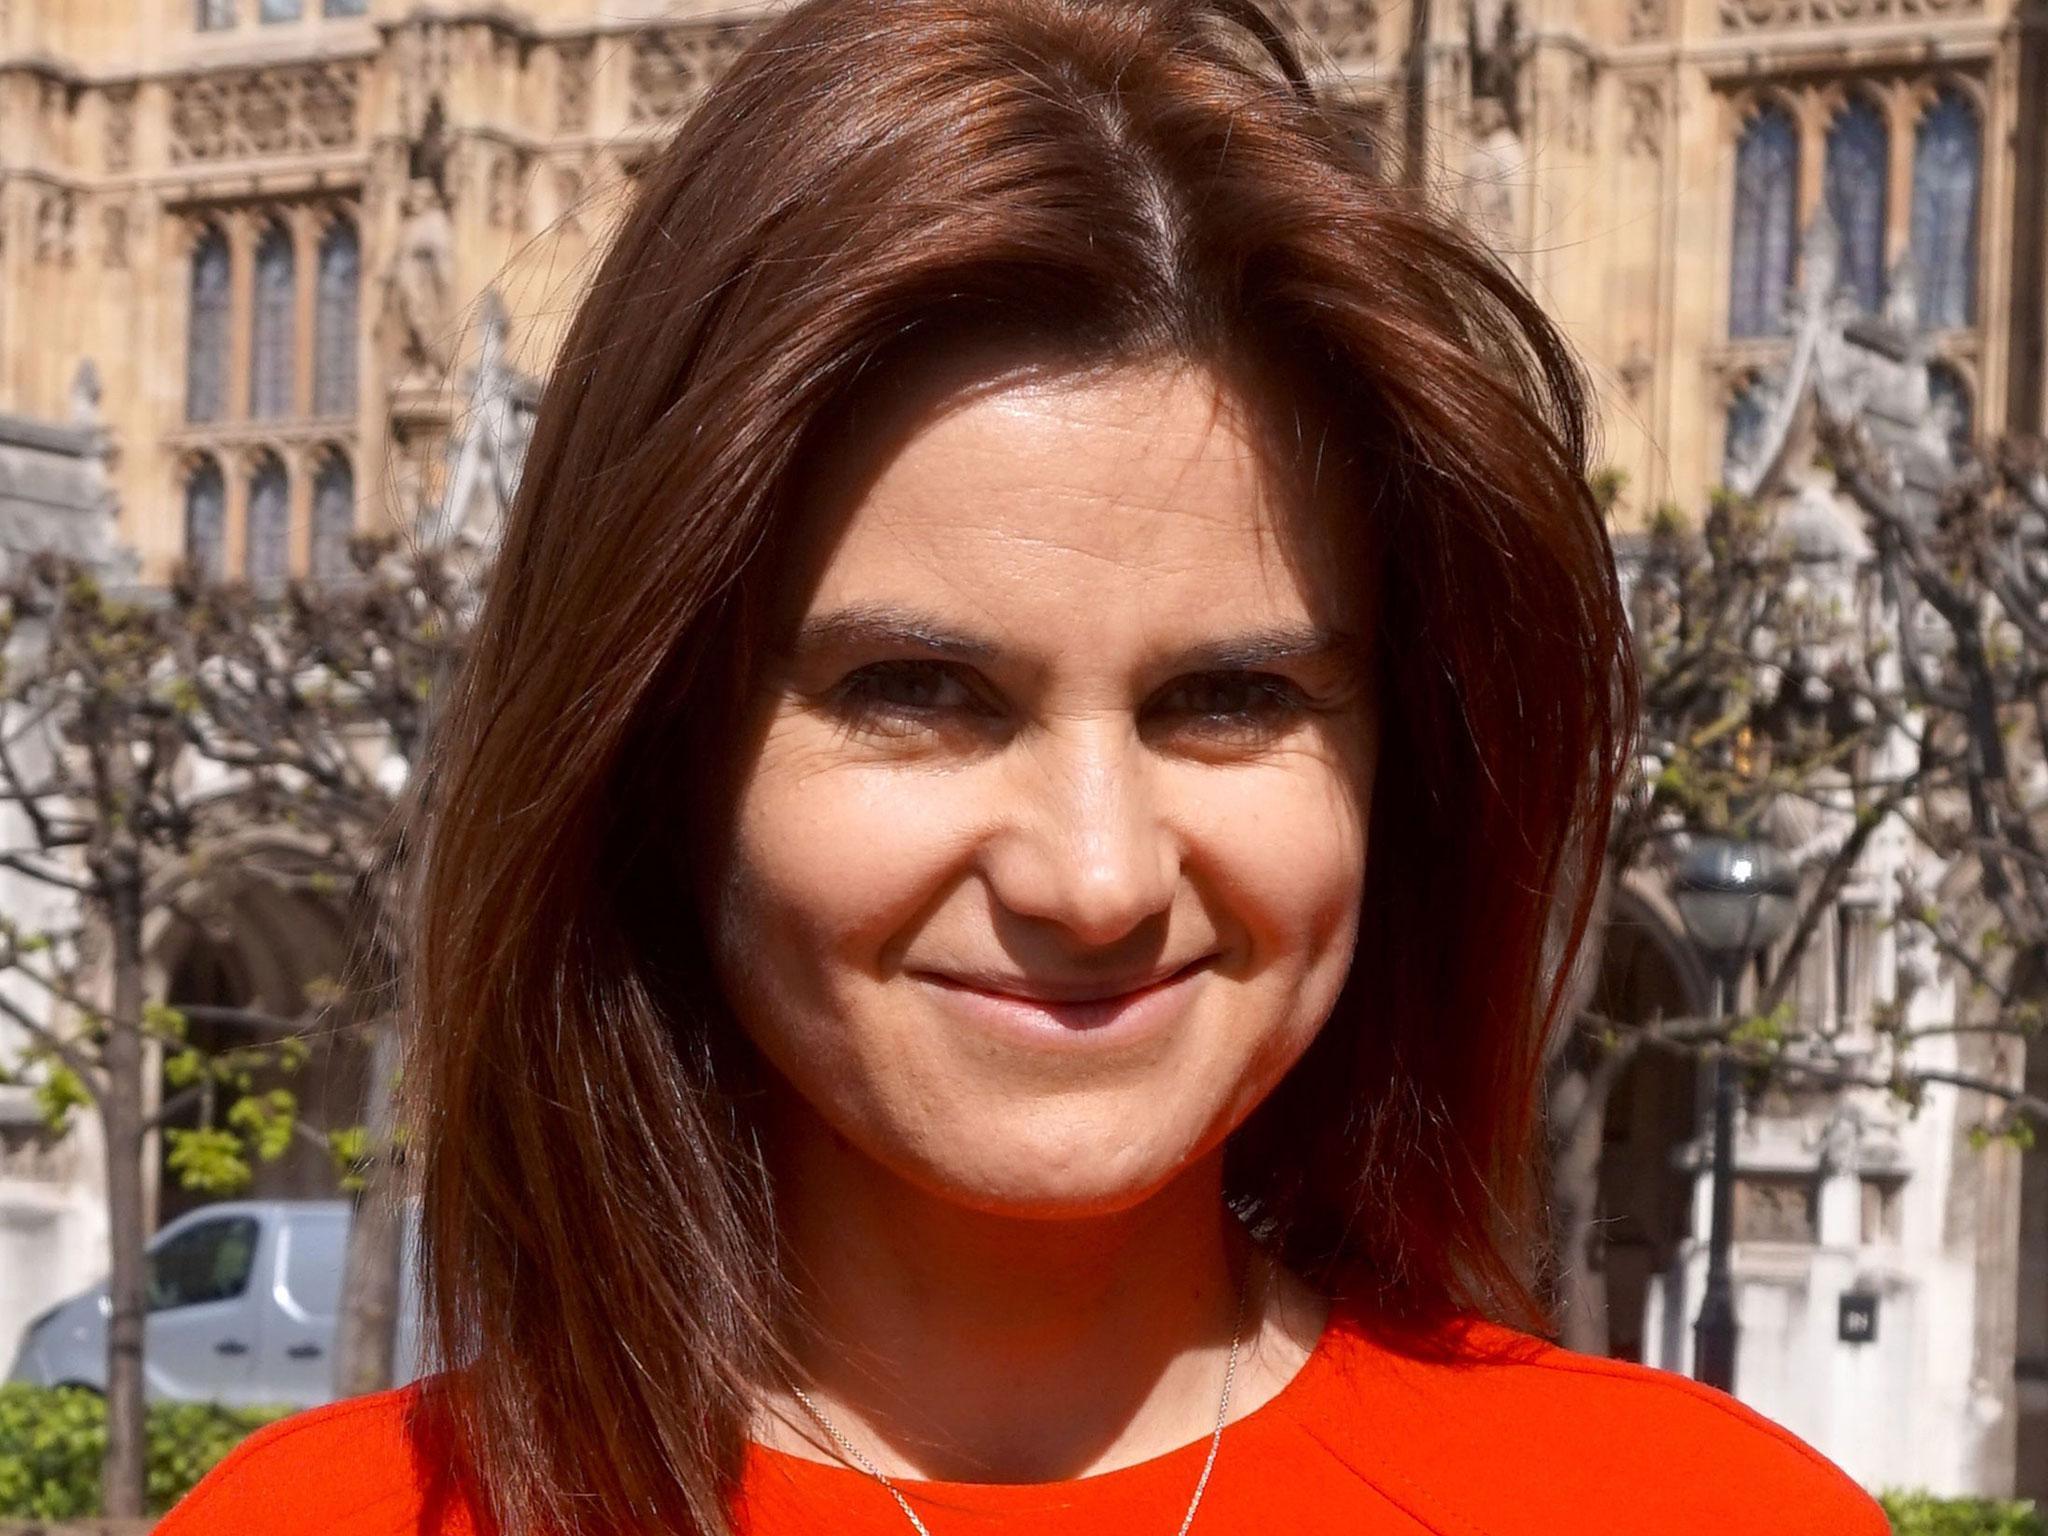 To remember Jo Cox, we must wrest control from Farage and Johnson – and embed compassion in our politics